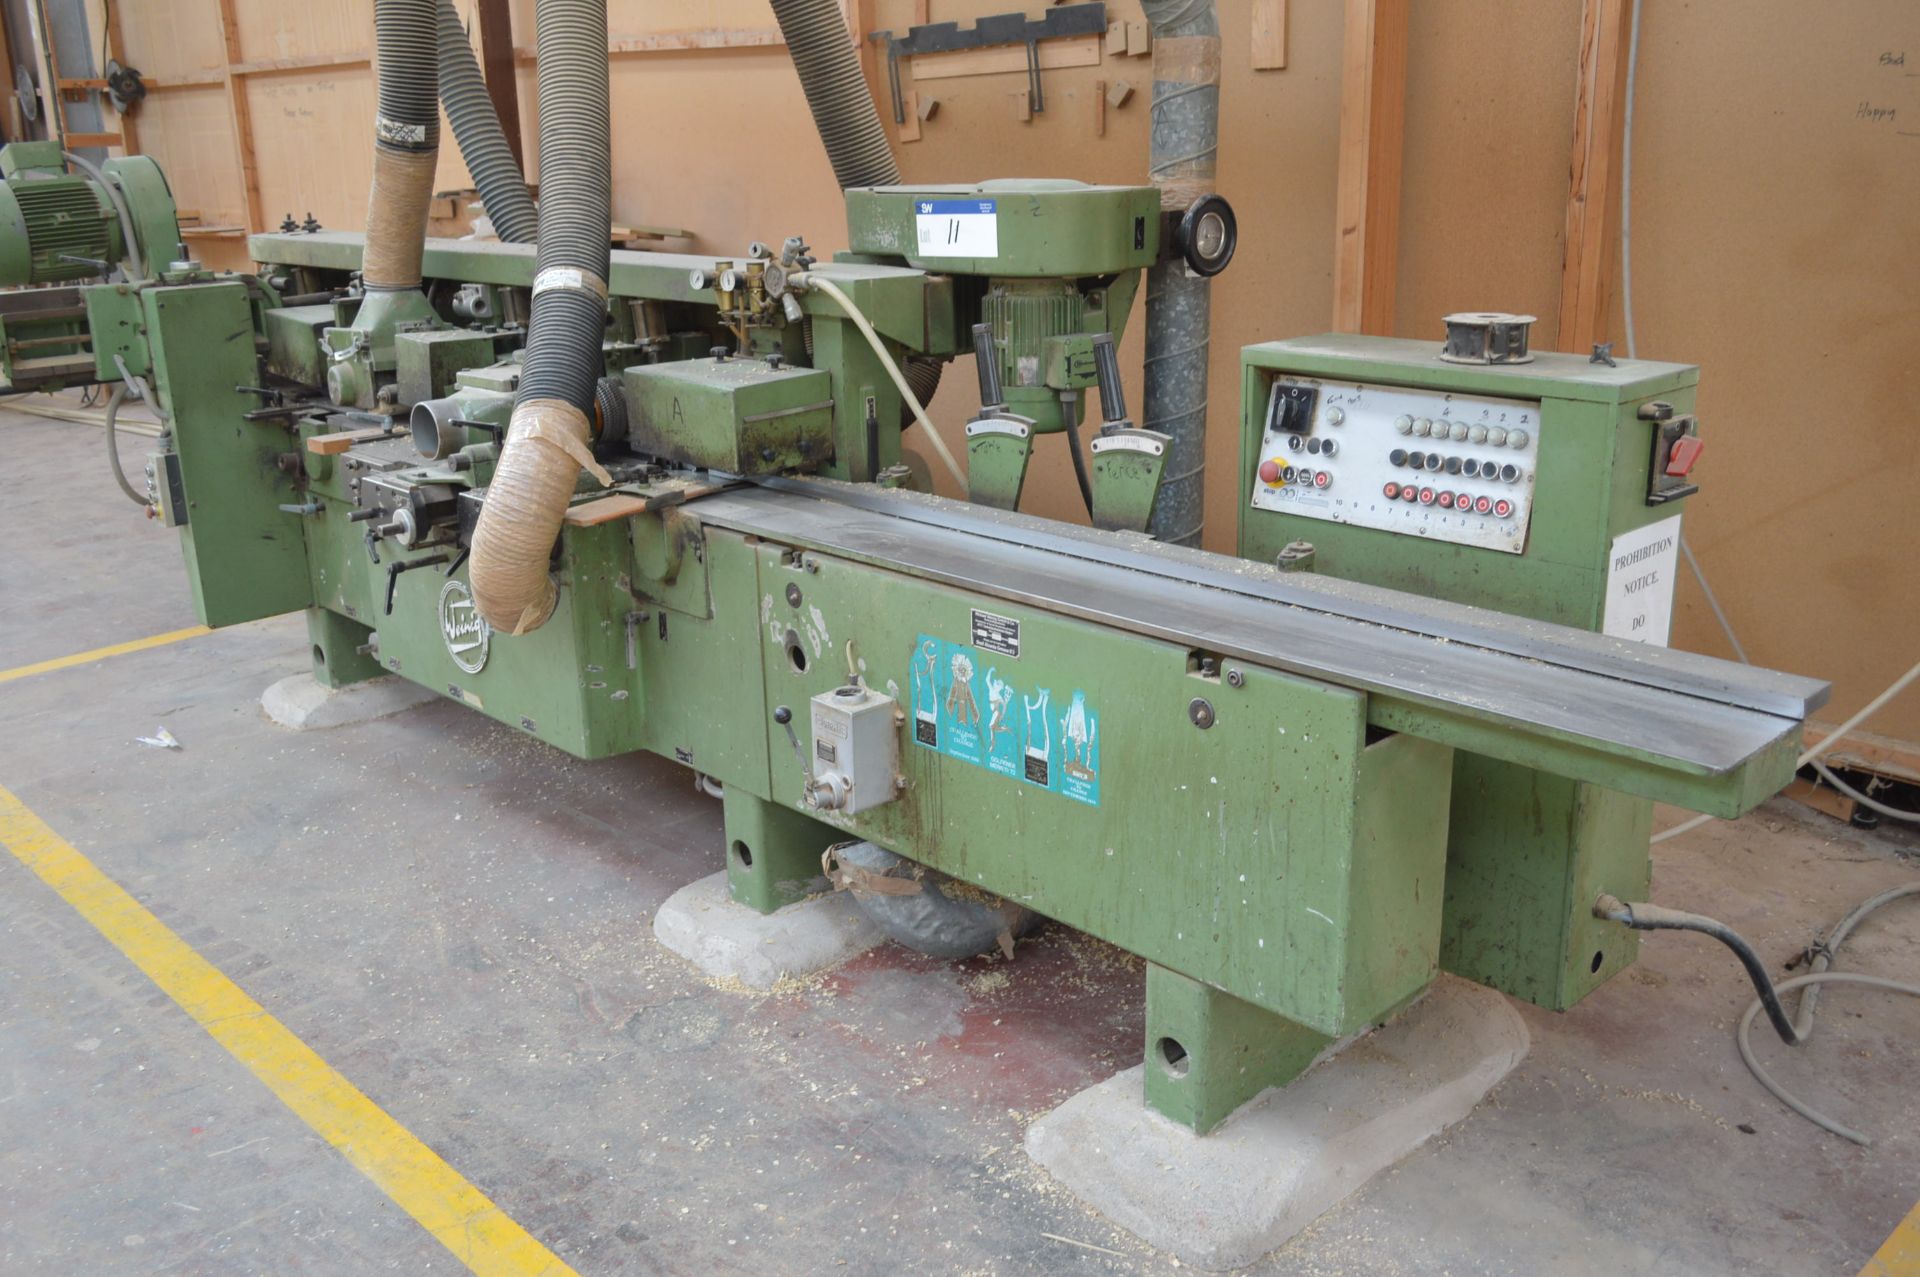 Weinig U17A 7-HEAD THROUGH FEED MOULDER, serial no. 1164/727, with extraction ducting to first 90°